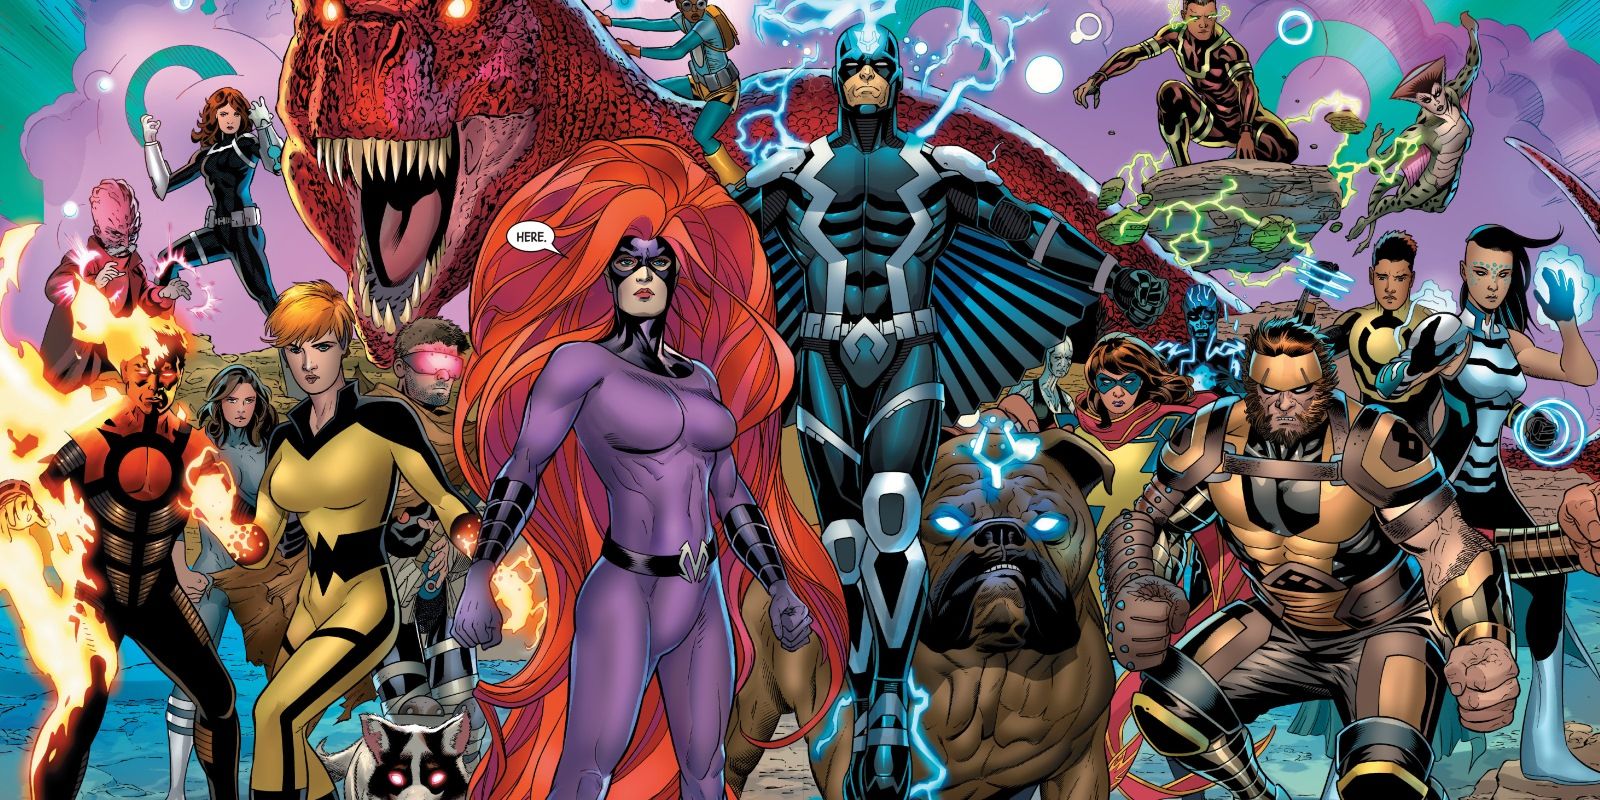 What You Need to Know About Marvel's Inhumans?